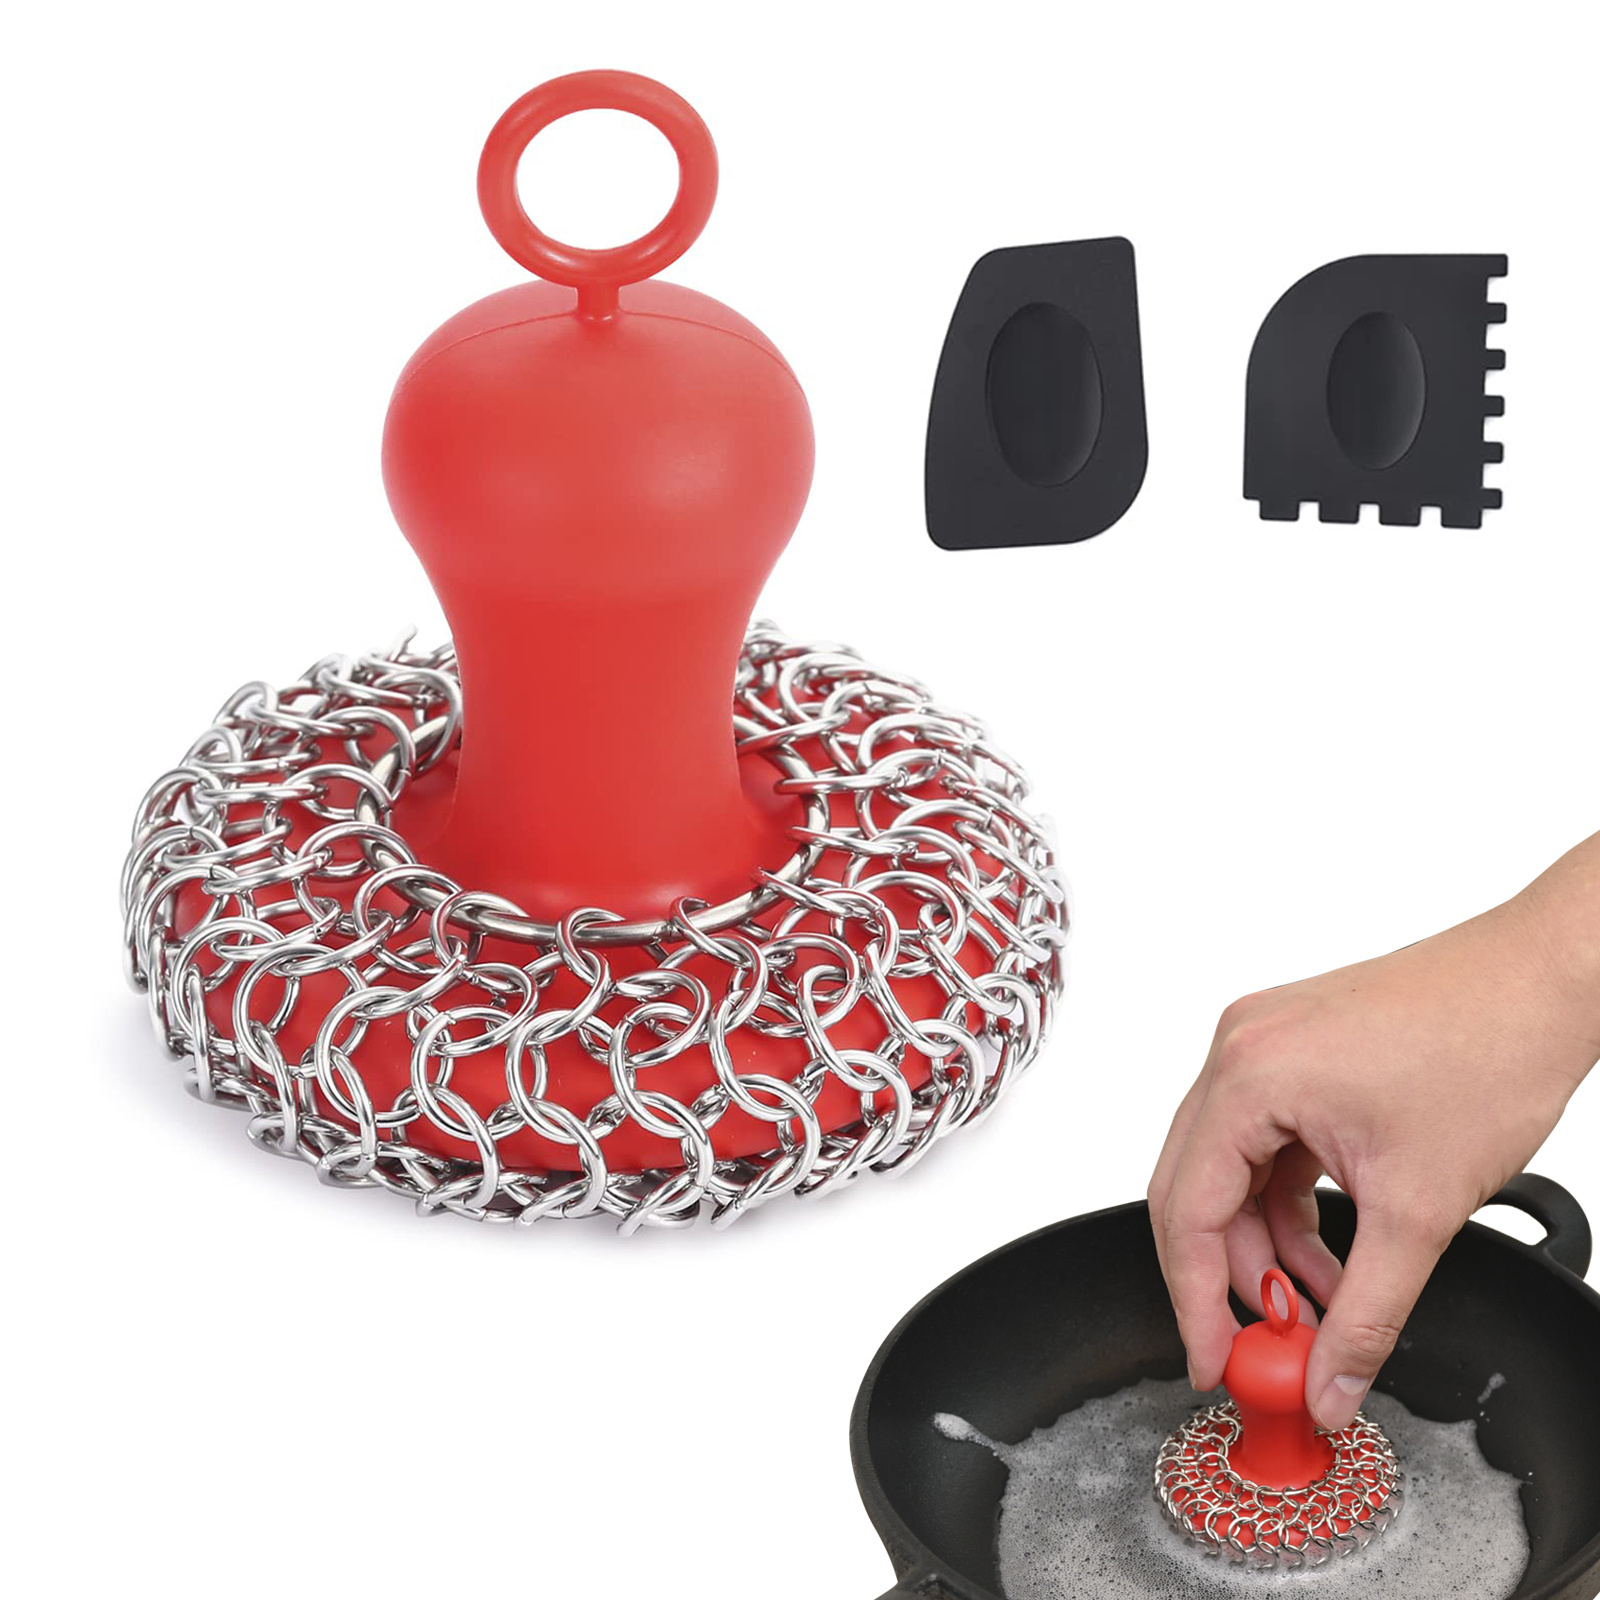 Cast Iron Chainmail Scrubber + Pan Scraper - Deluxe Ergonomic Stainless and  Silicone Cleaner for Pots and Skillets - Food-Safe Design - Easy to Clean  Dishwasher Safe Cookware Sponge Kitchen Accessory